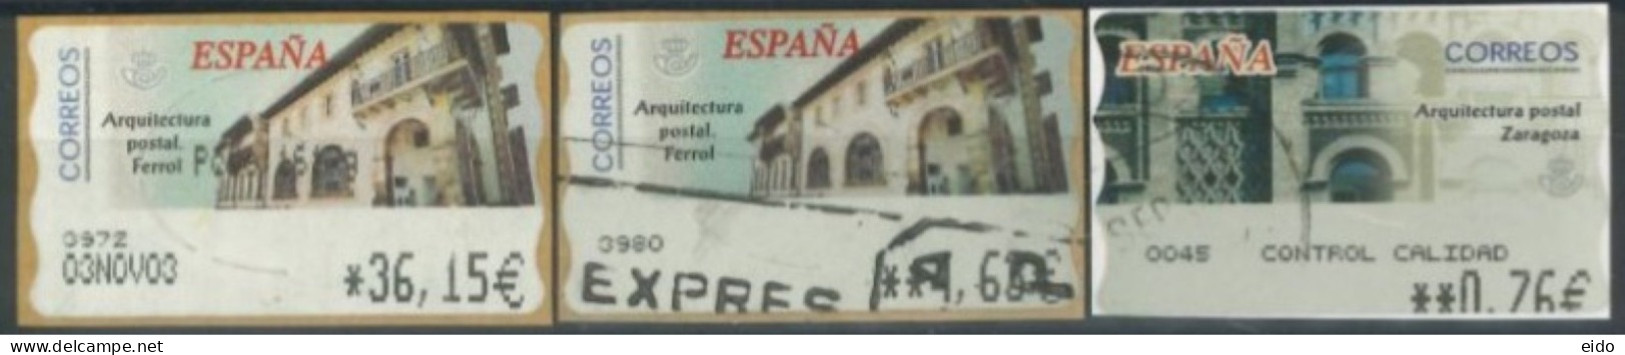 SPAIN - 2003 - POSTAL ARCHITECTURE FERROL & ZARAGOZA STAMPS LABELS SET OF 3 OF DIFFERENT VALUES, USED . - Usati